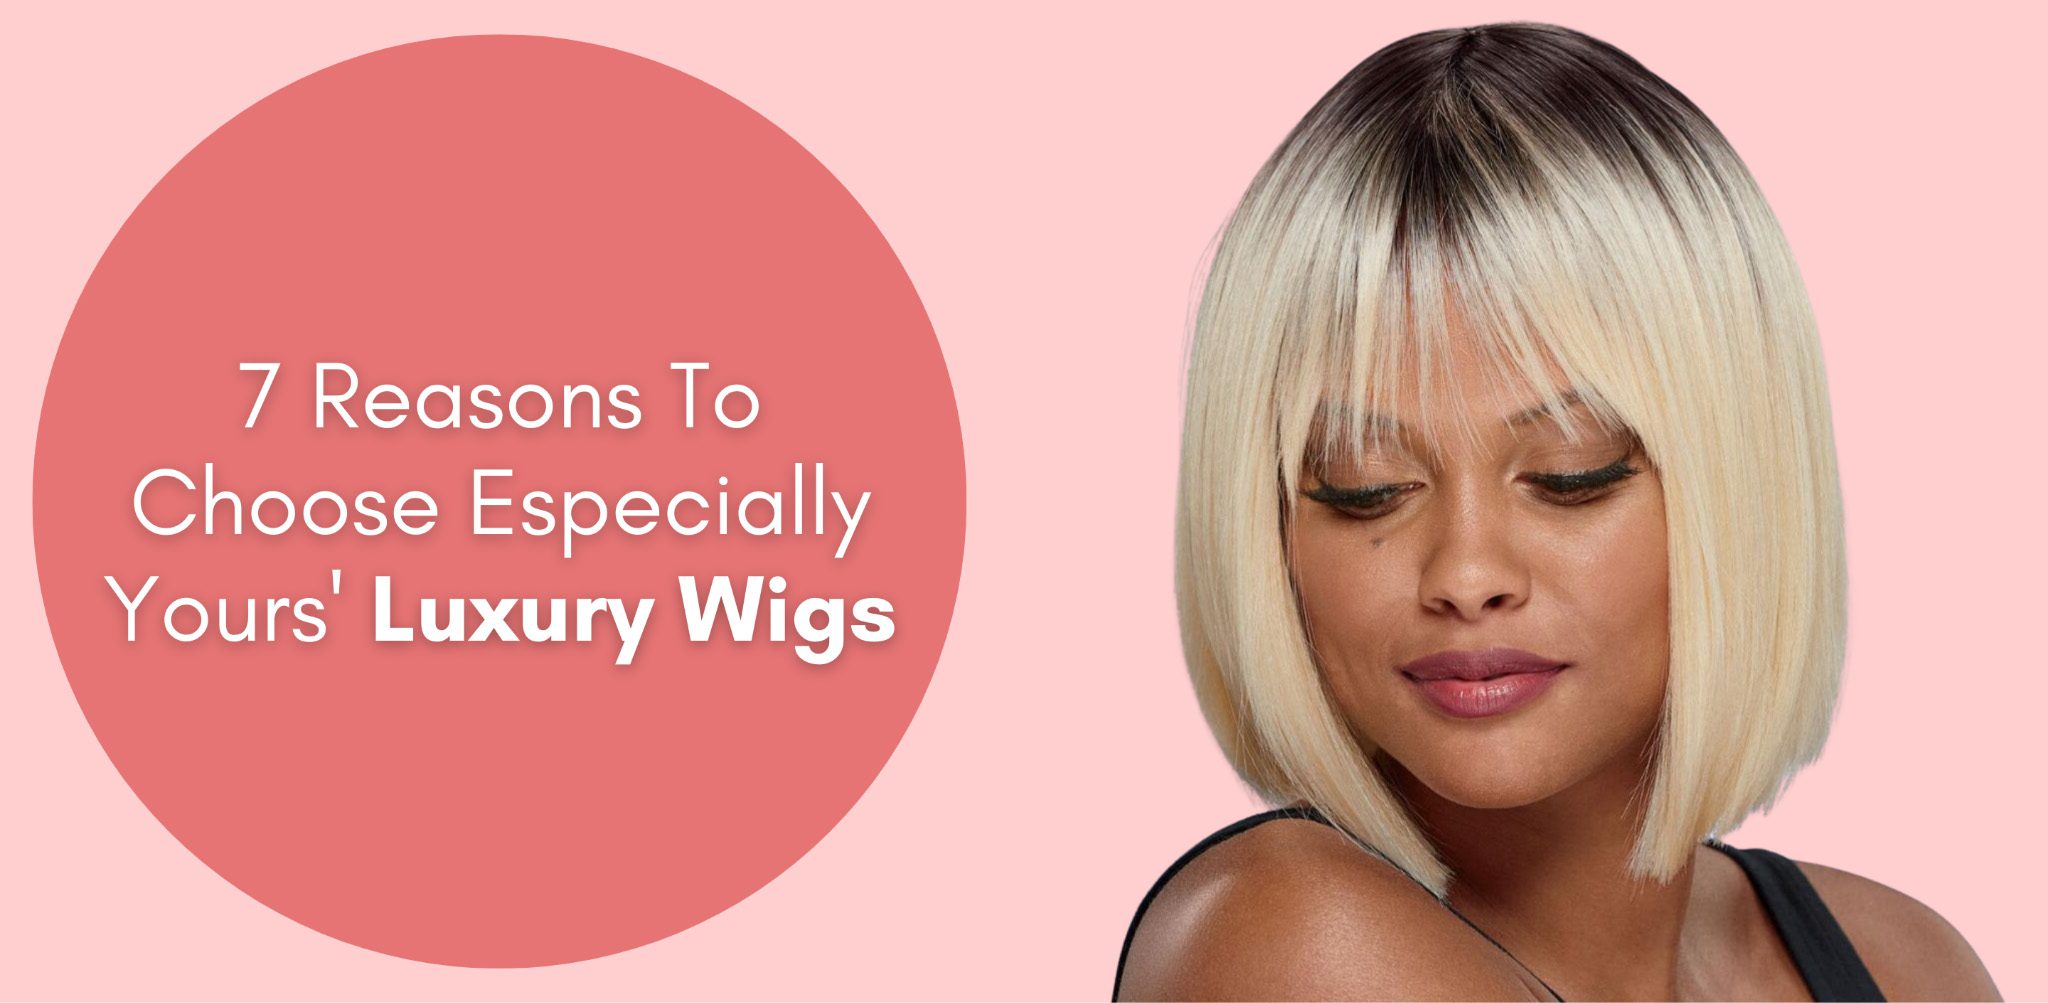 7 Reasons To Choose Especially Yours’ Luxury Wigs